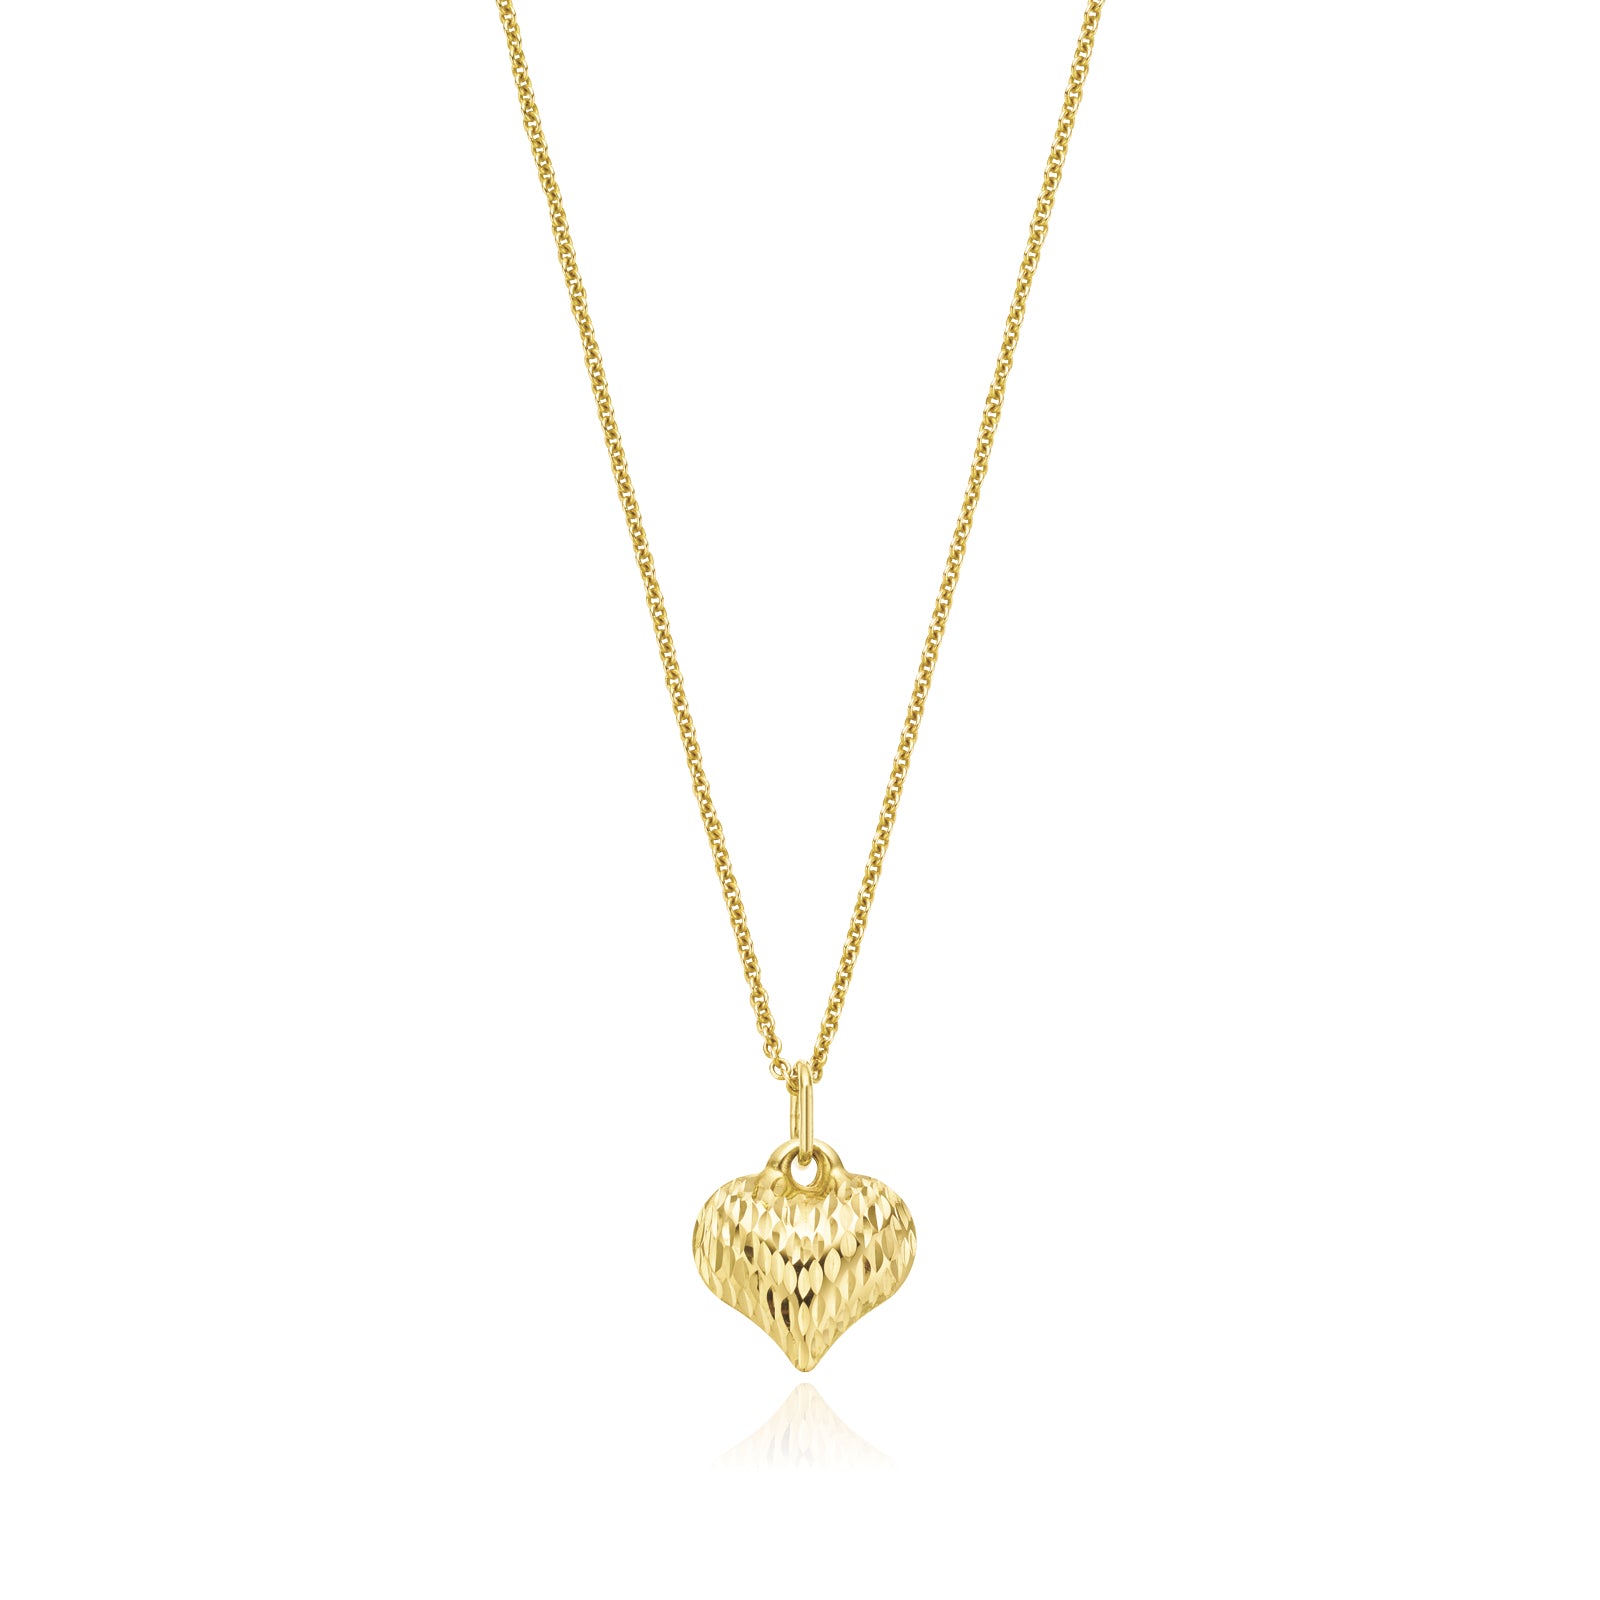 9ct Gold Open Heart Pendant 16 Inch Necklace | Jewellerybox.co.uk